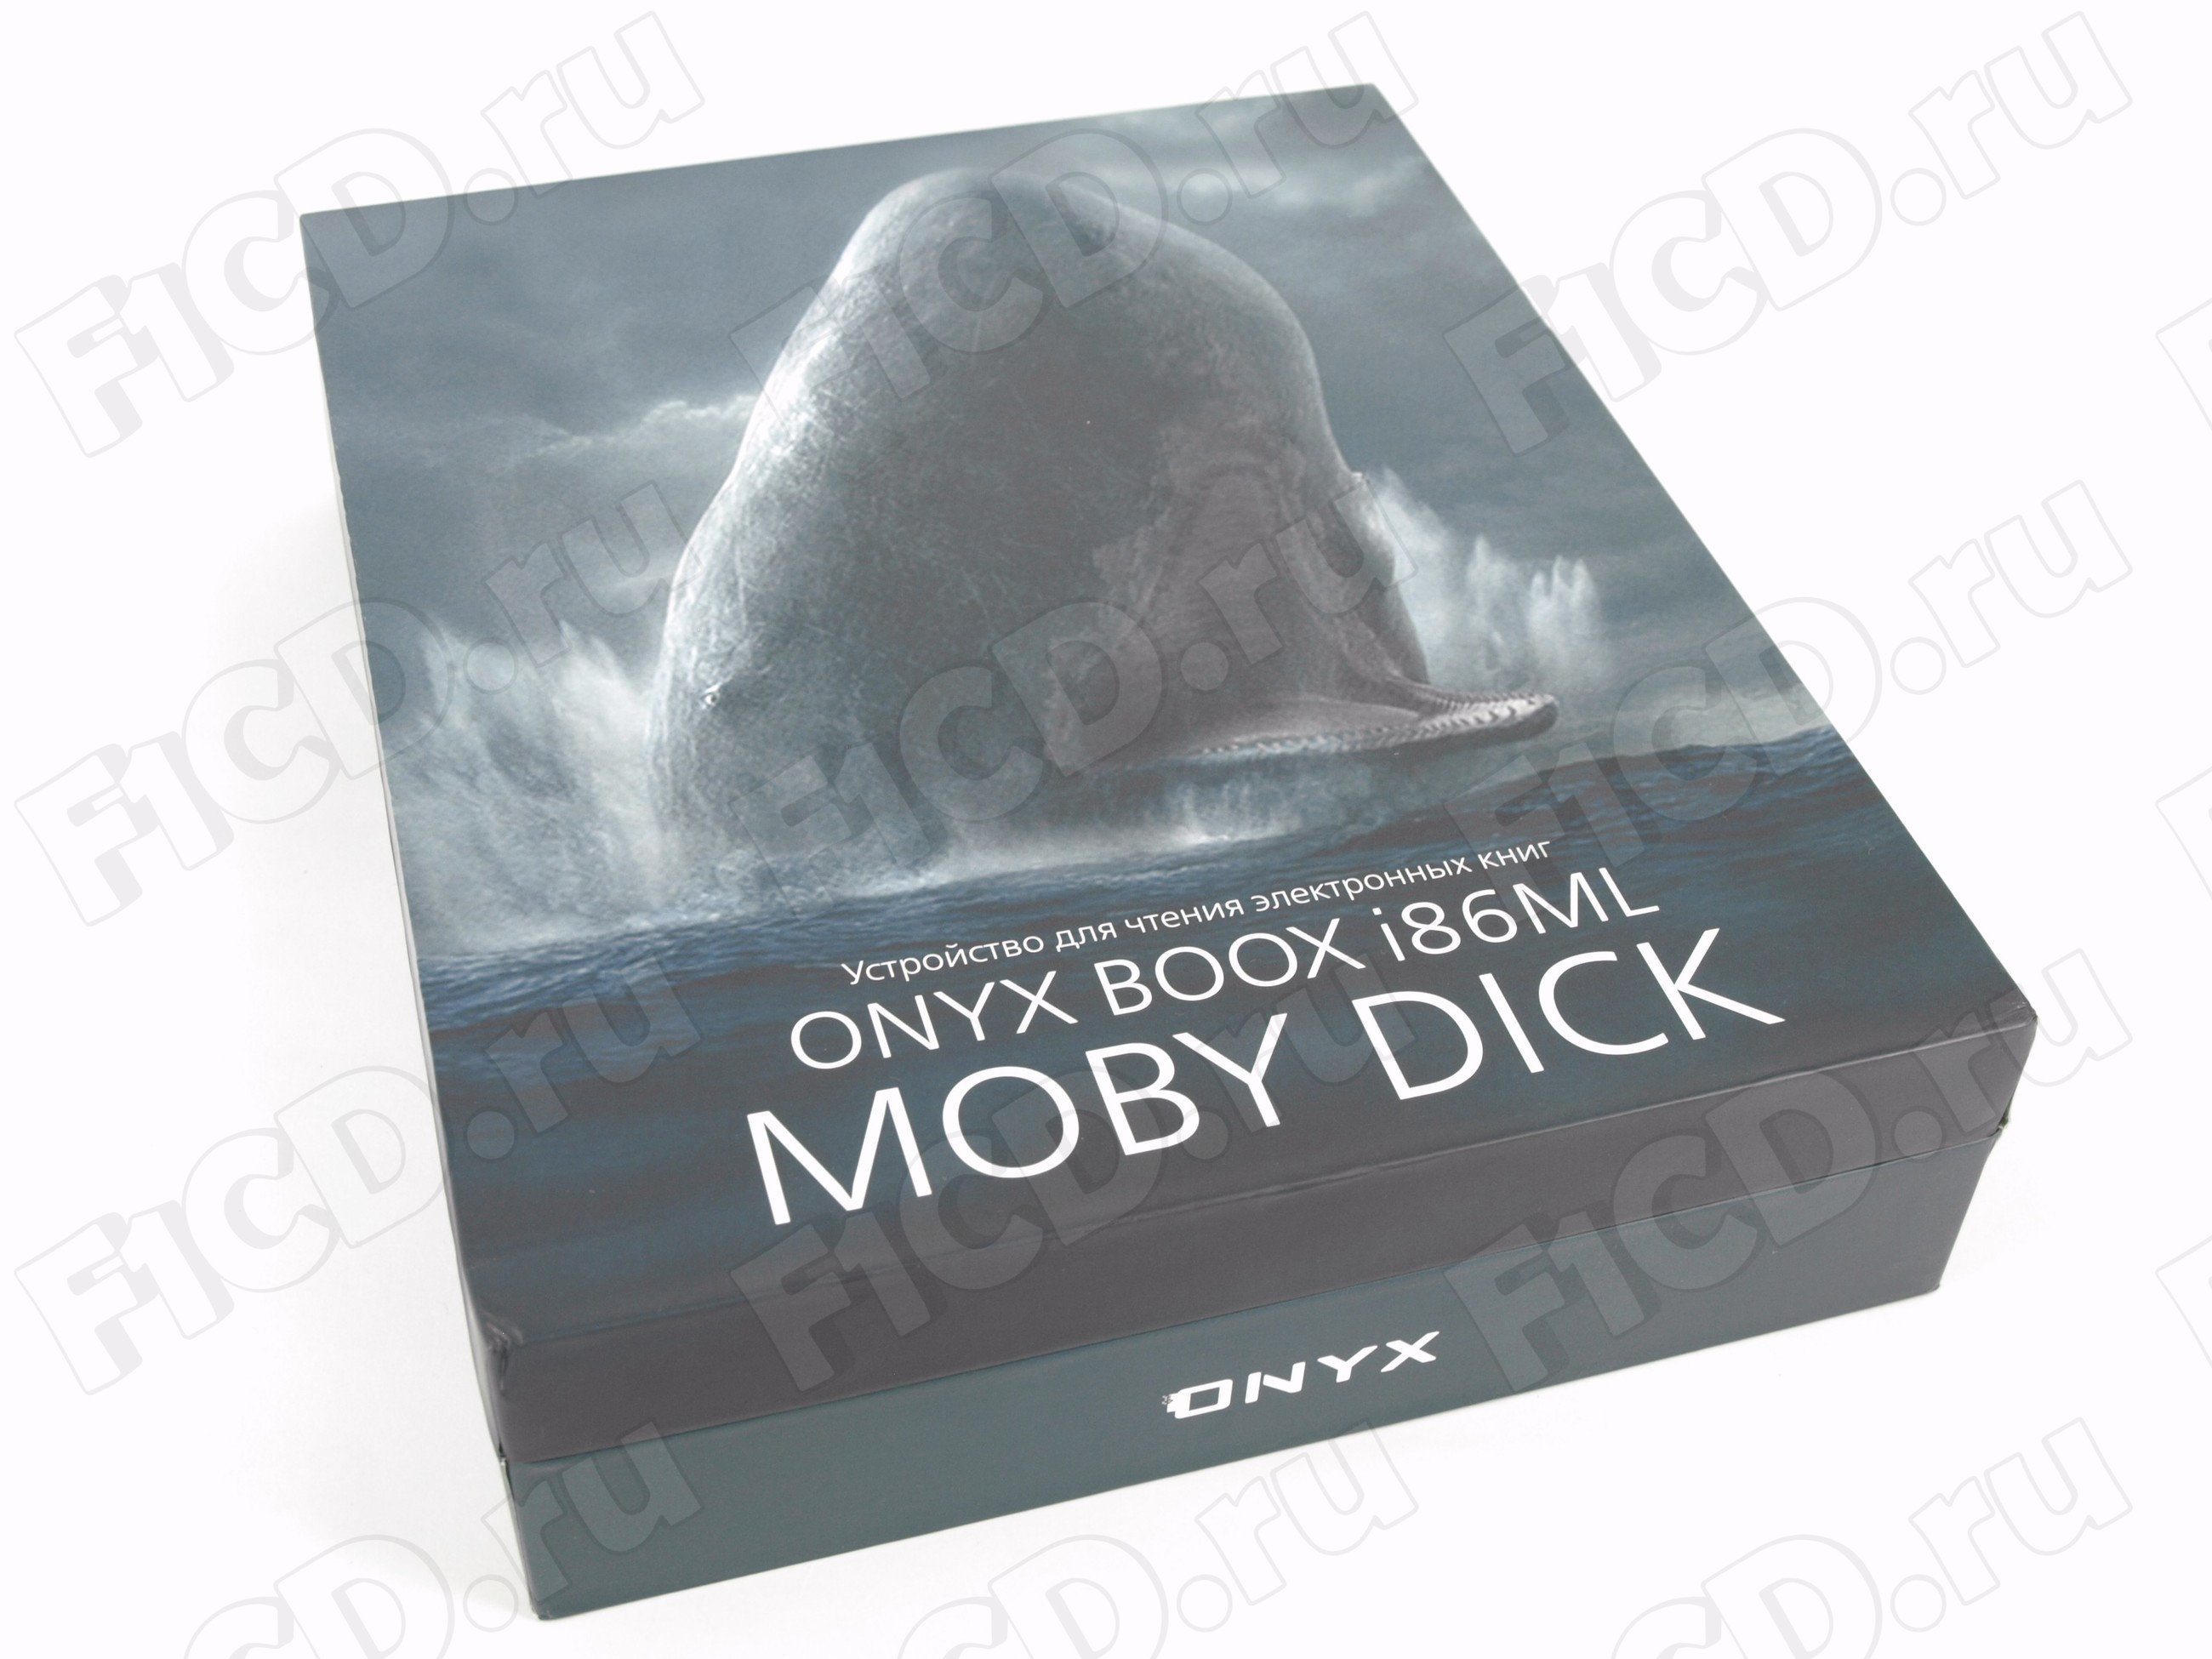 Moby dick safety comfort hearthstone supper warm blankets